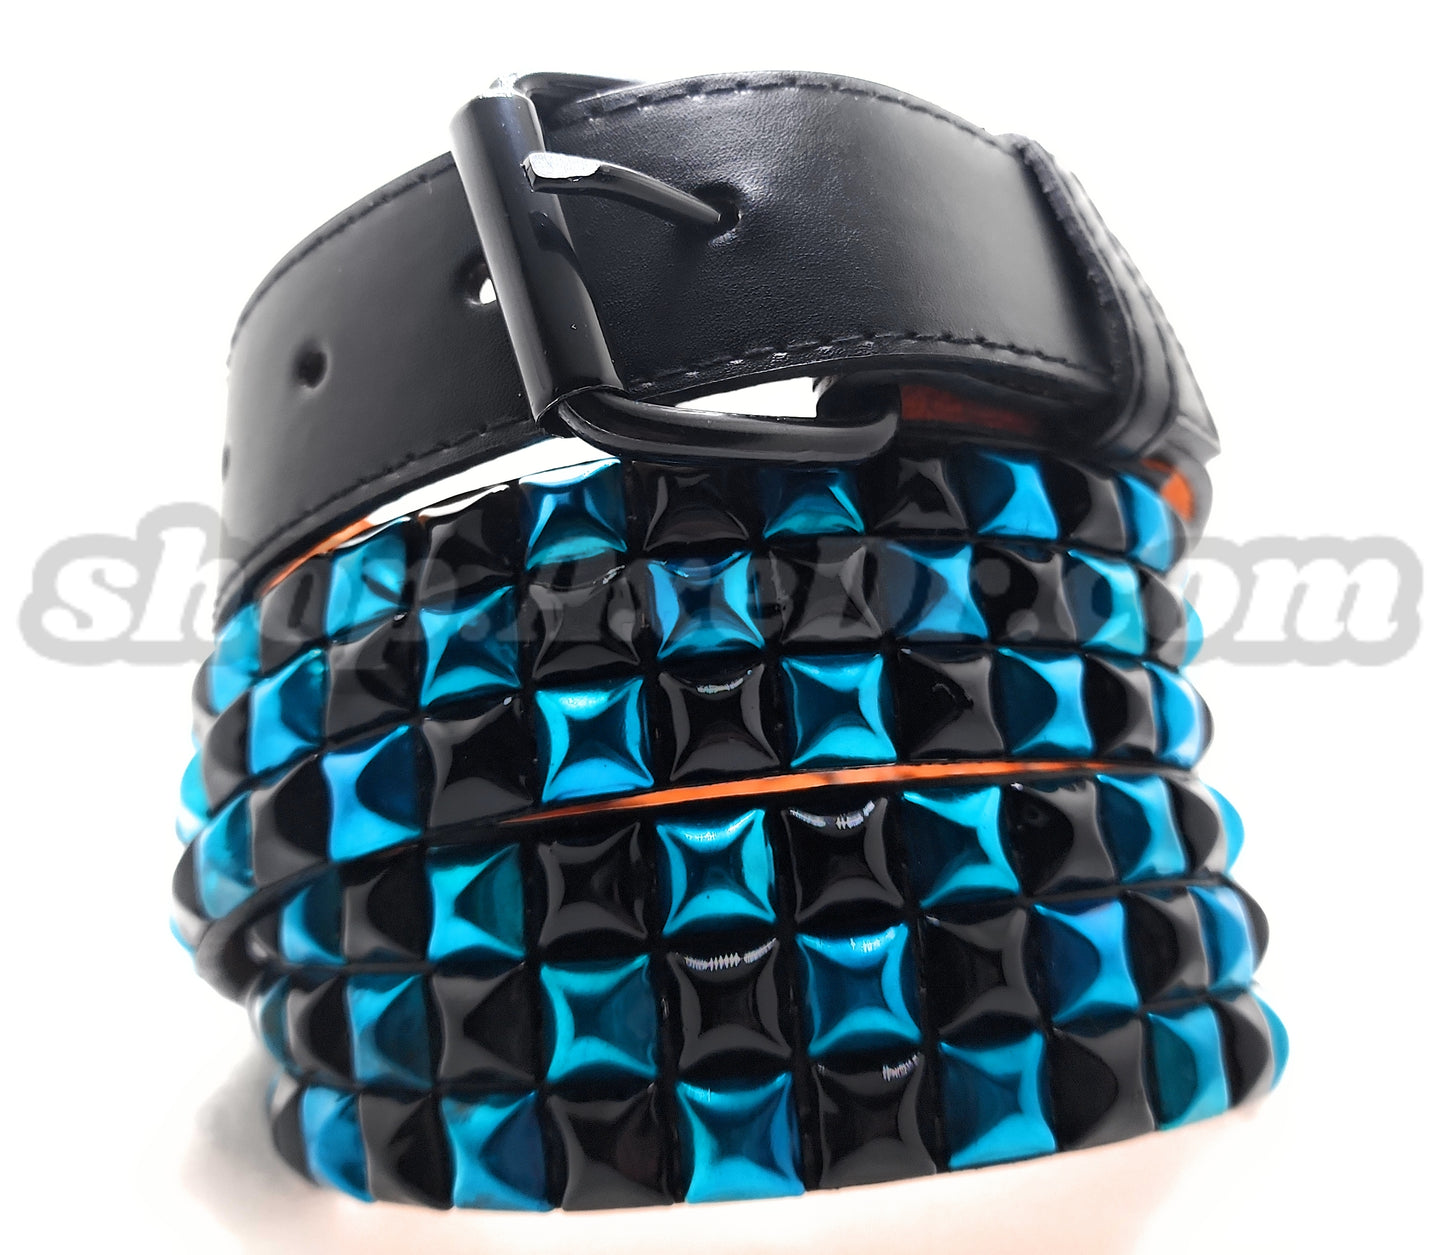 Handmade Sky Blue and Black Checker Pyramid Studded Stitched Leather Belt Punk